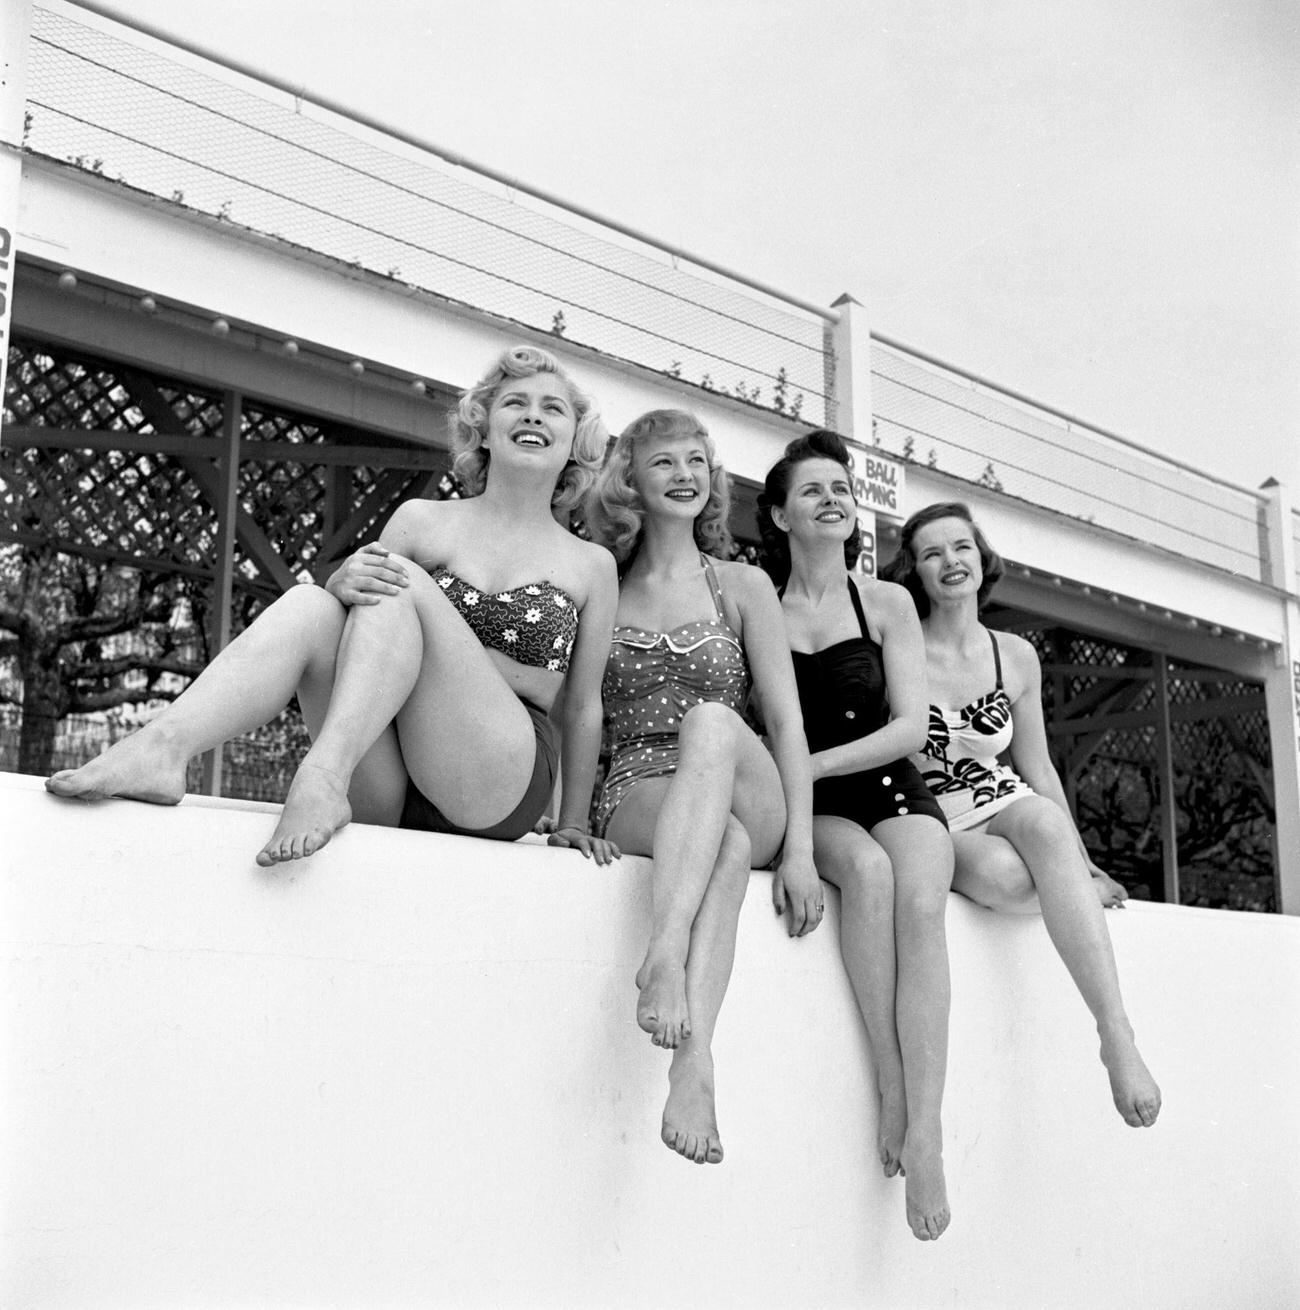 Cbs Models By The Pool At Steeplechase Park, Coney Island, Brooklyn, 1953.